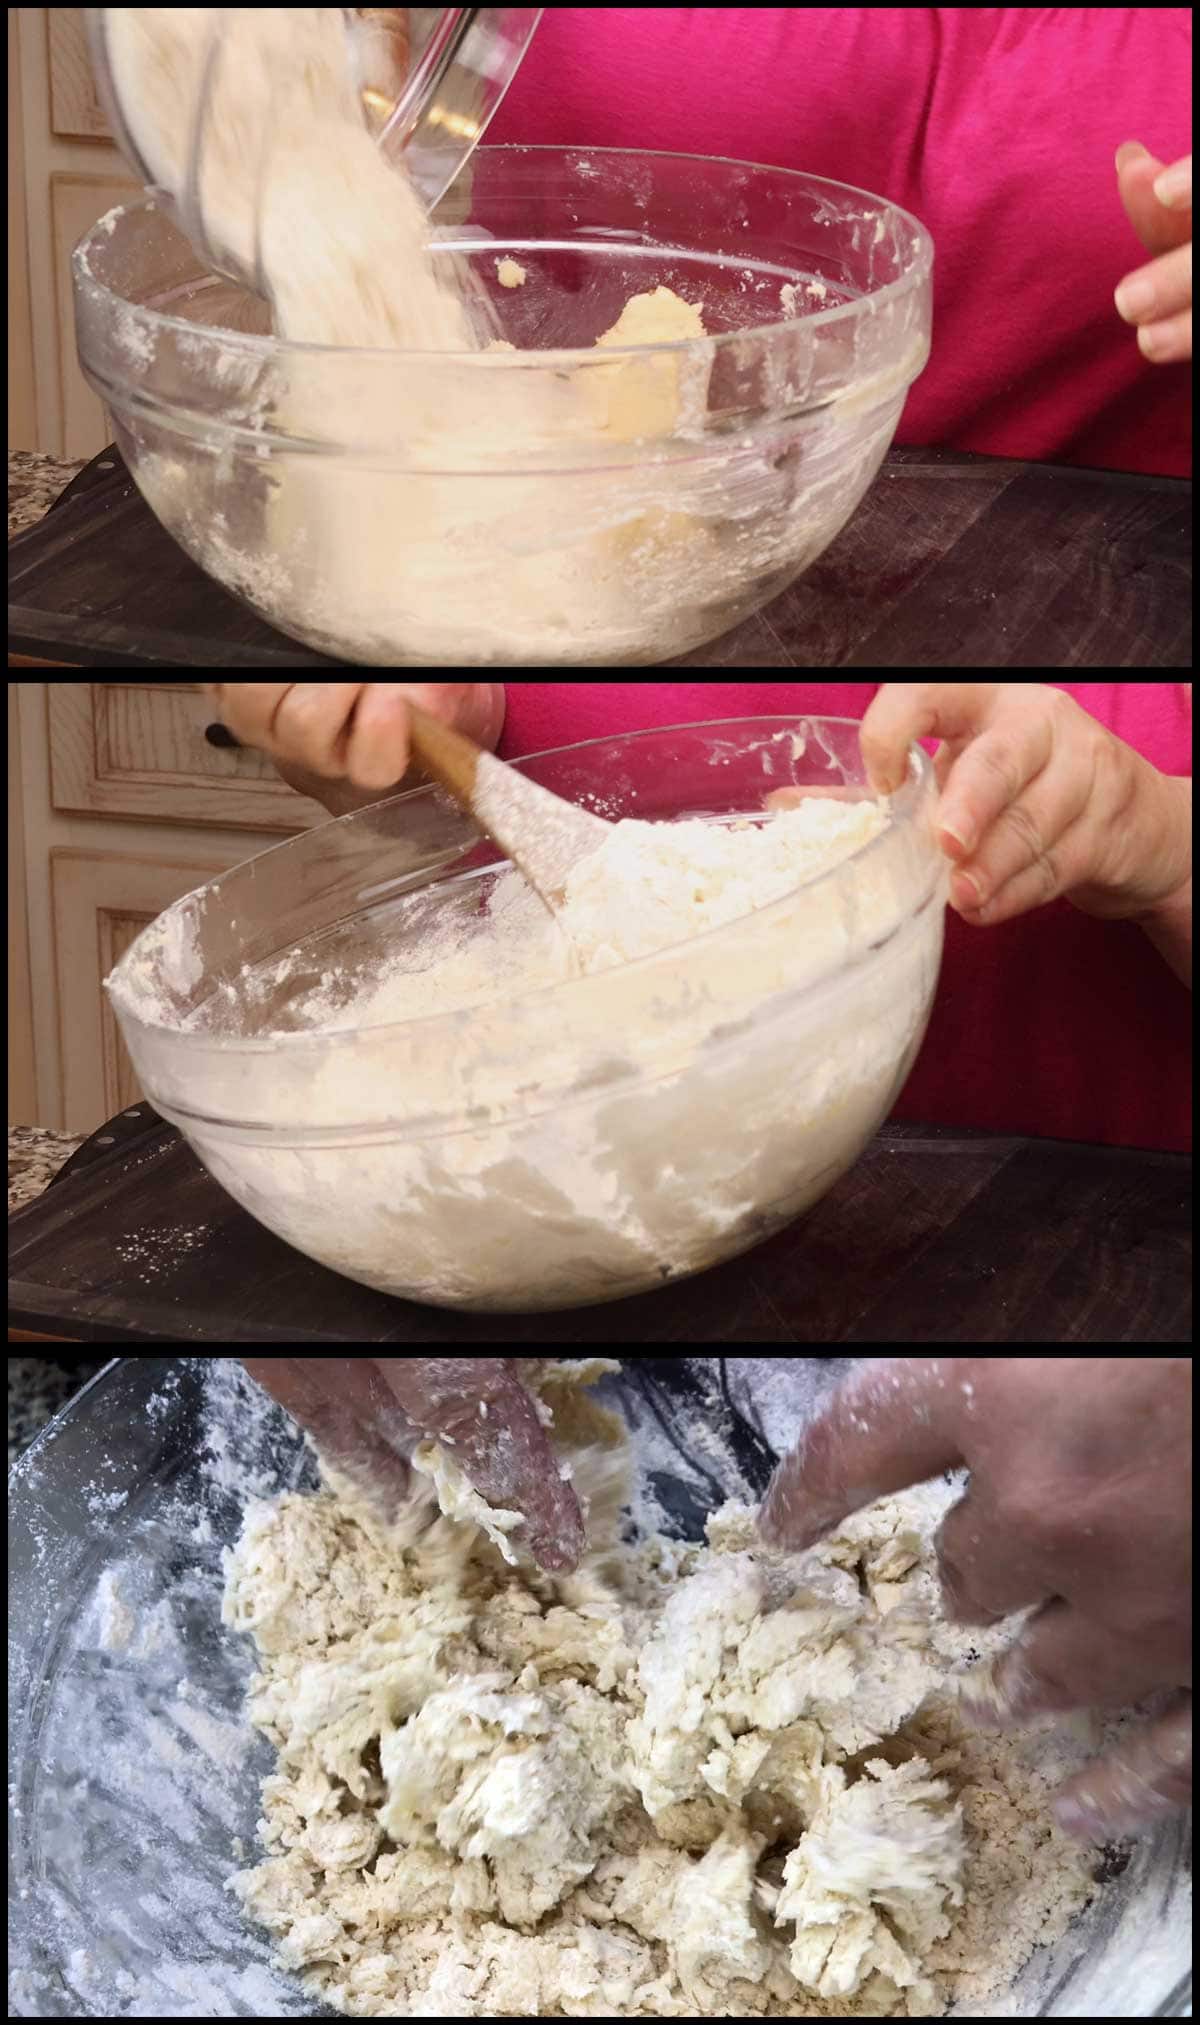 Mixing the flour into the shortbread crust 